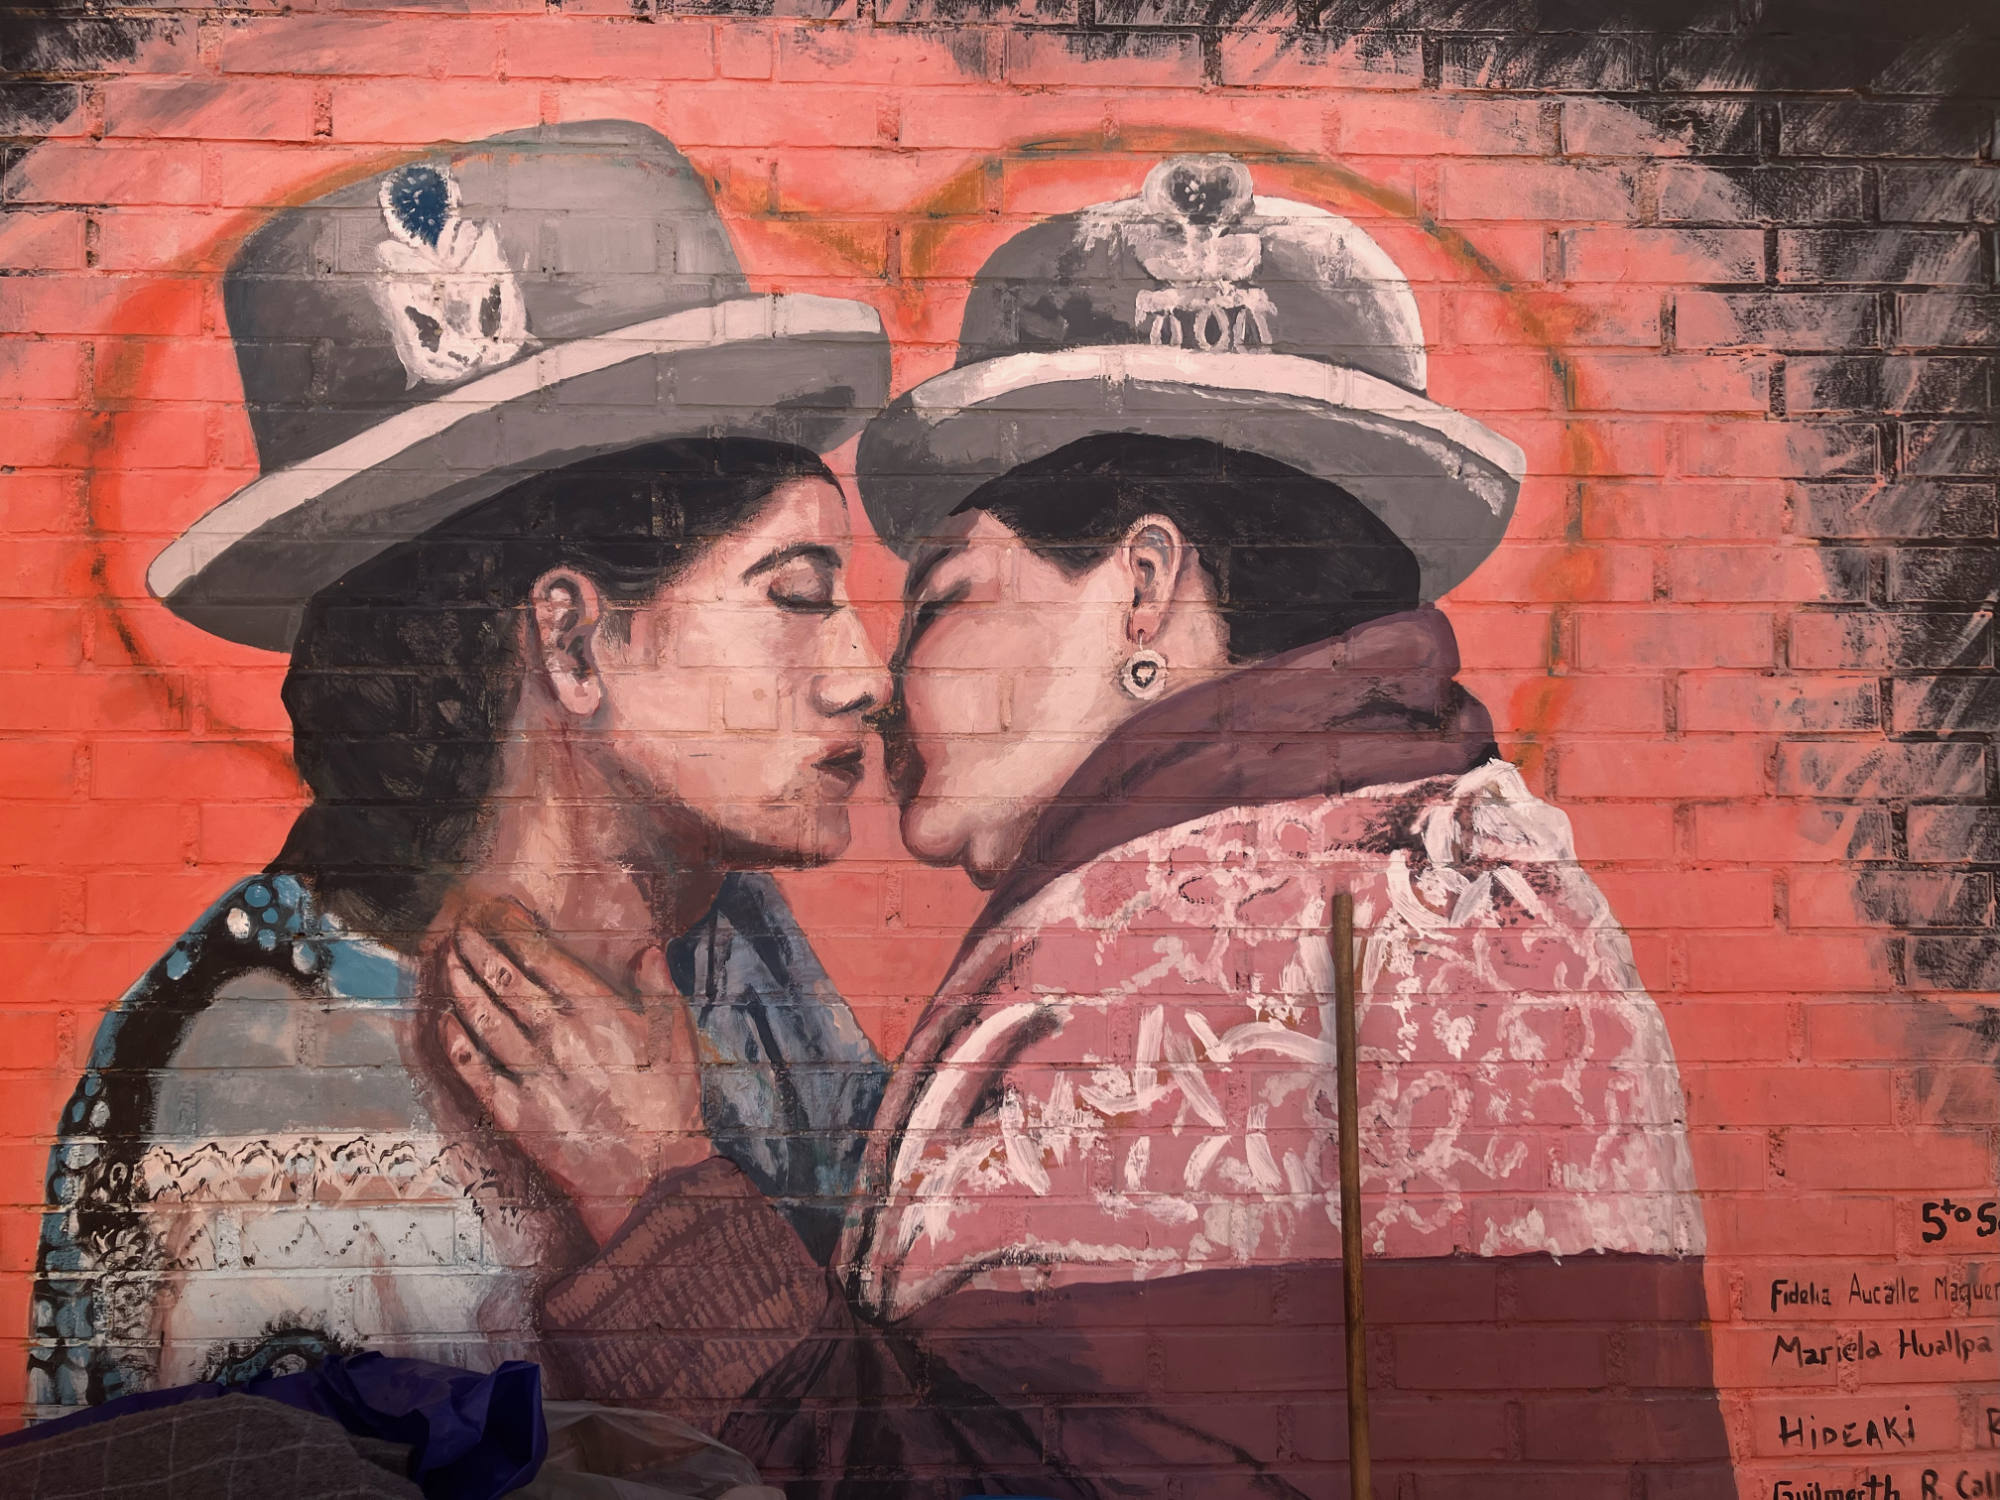 Colorful mural showing to women in Aymara attire almost kissing.